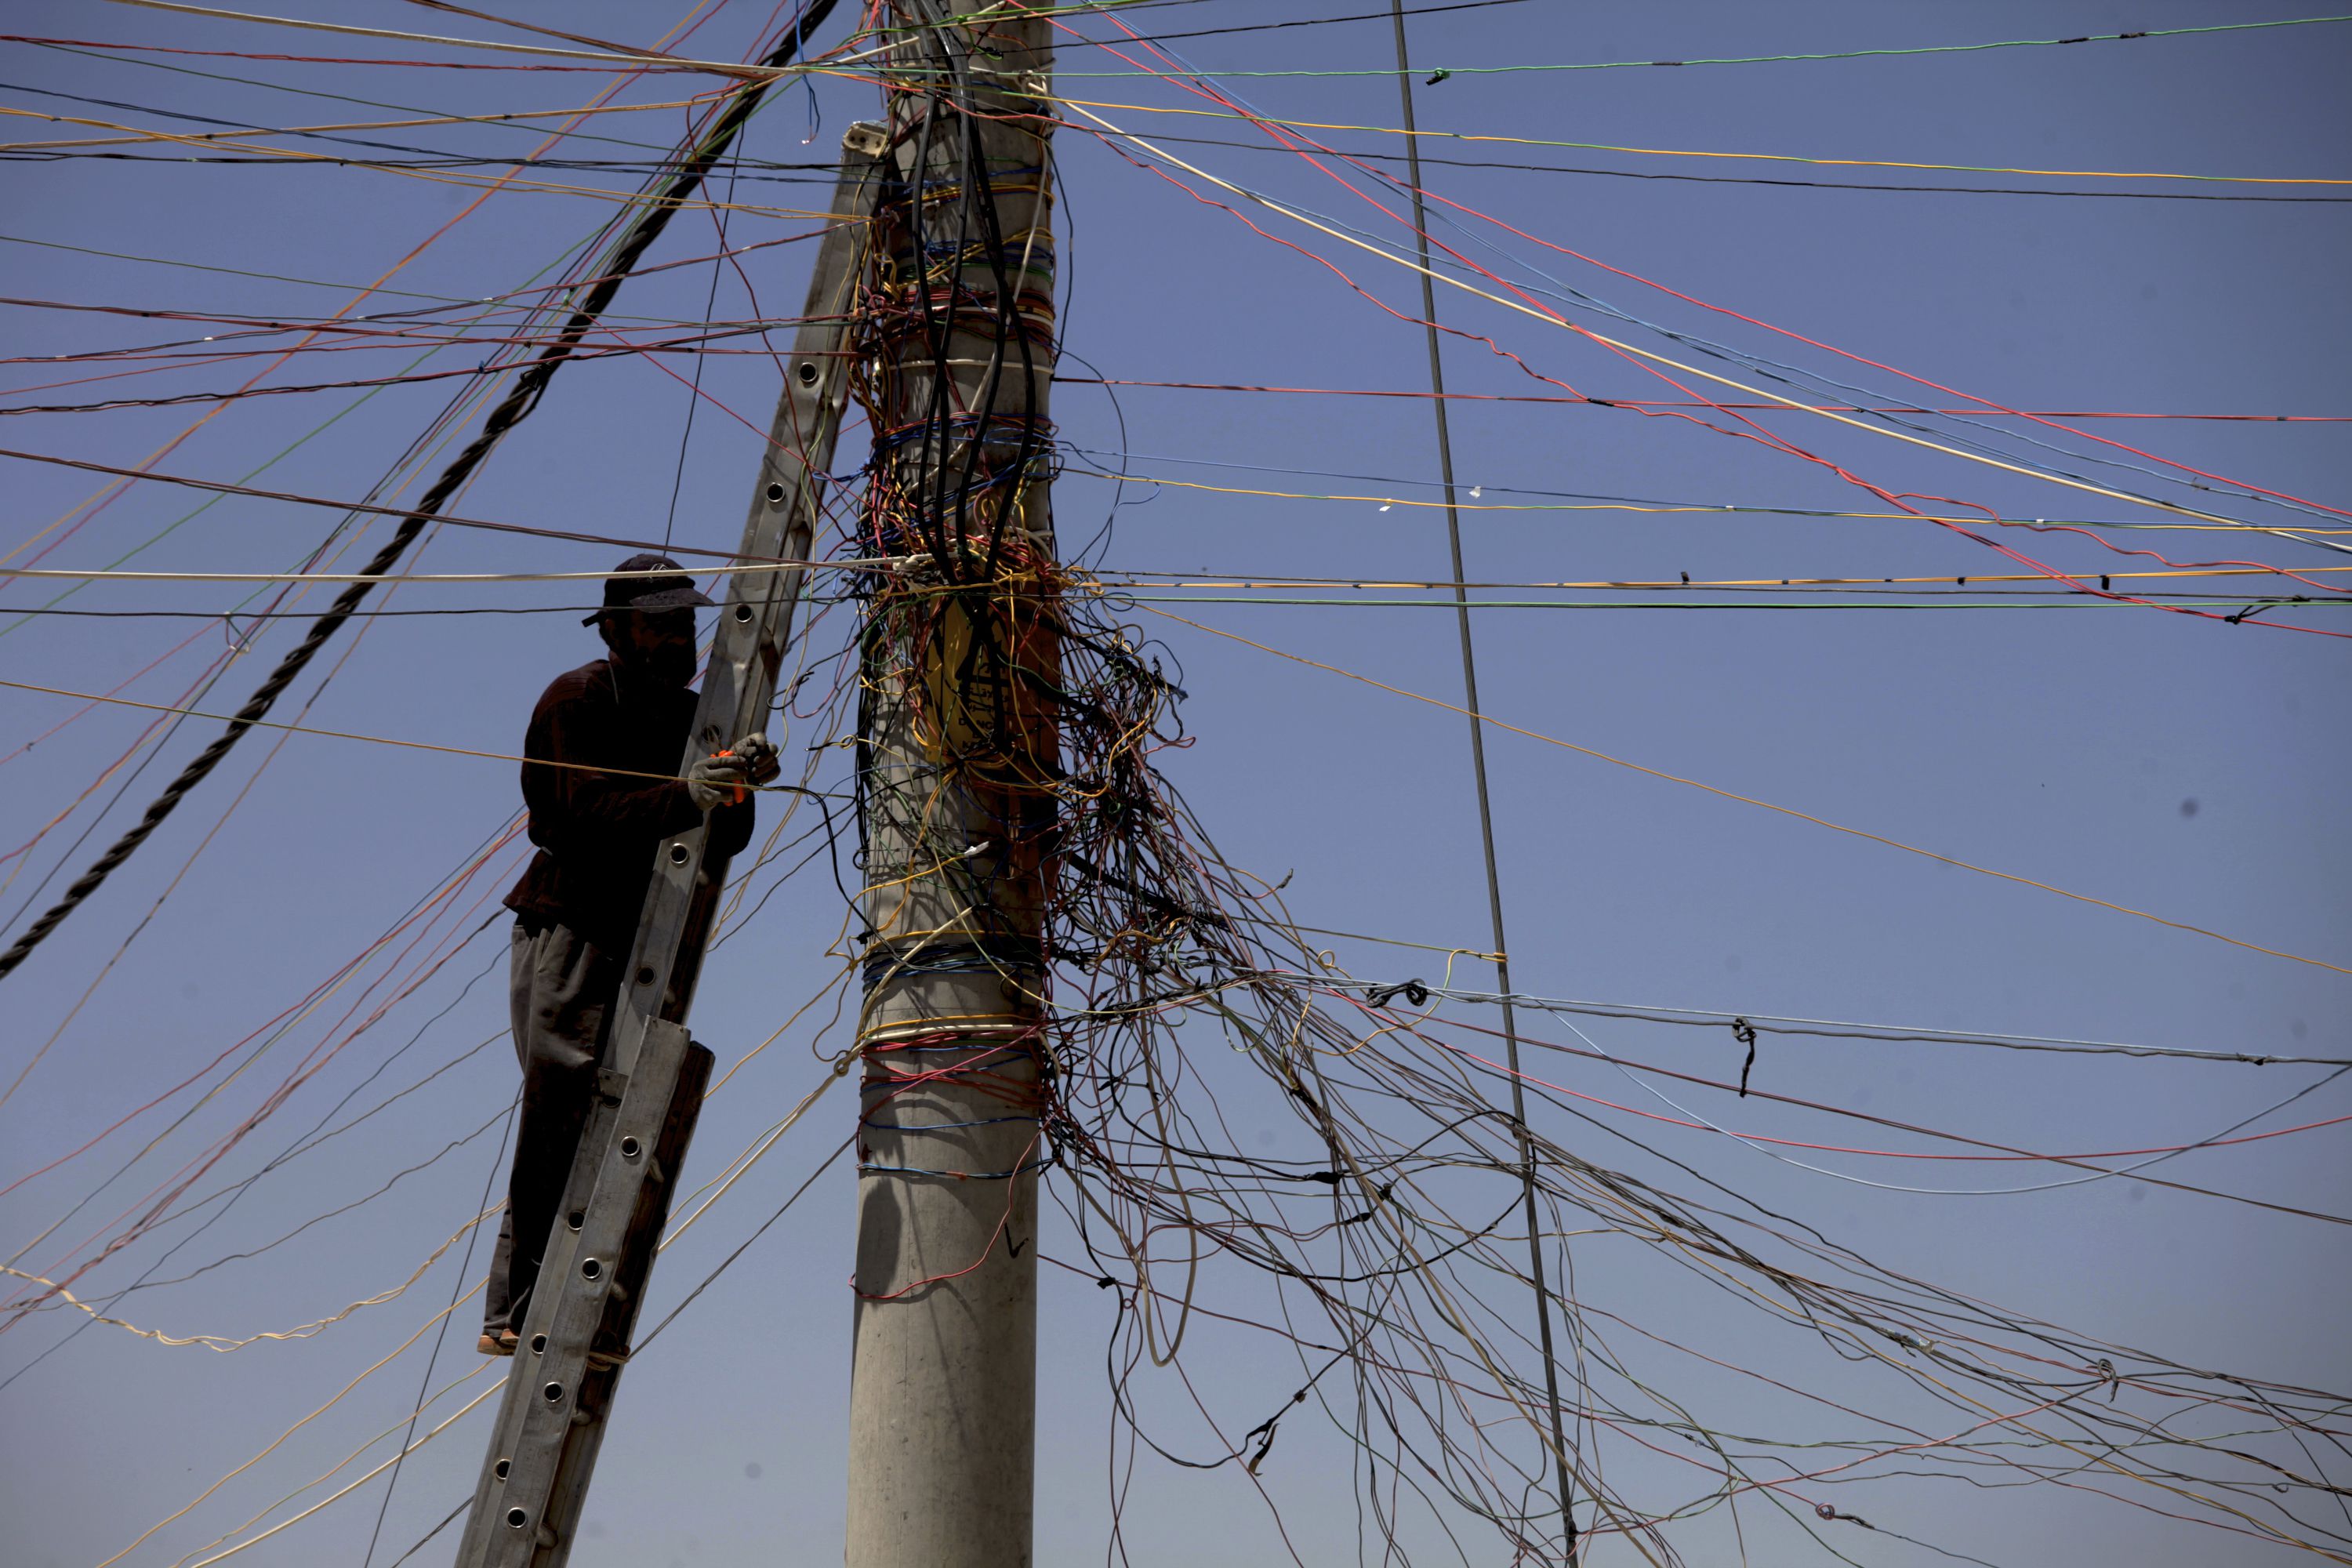 A man tries to connect his store with electricity from the main electricity pole at the Zaatari Refugee Camp, in Mafraq, Jordan, Tuesday April 22, 2014. An estimated 104,494 refugees reside in the sprawling Zaatari refugee camp, according to the United Nations High Commissioner for Refugees (UNHCR), with the majority of the population coming from the Daara Governorate in southwest Syria. (AP Photo/Mohammad Hannon)